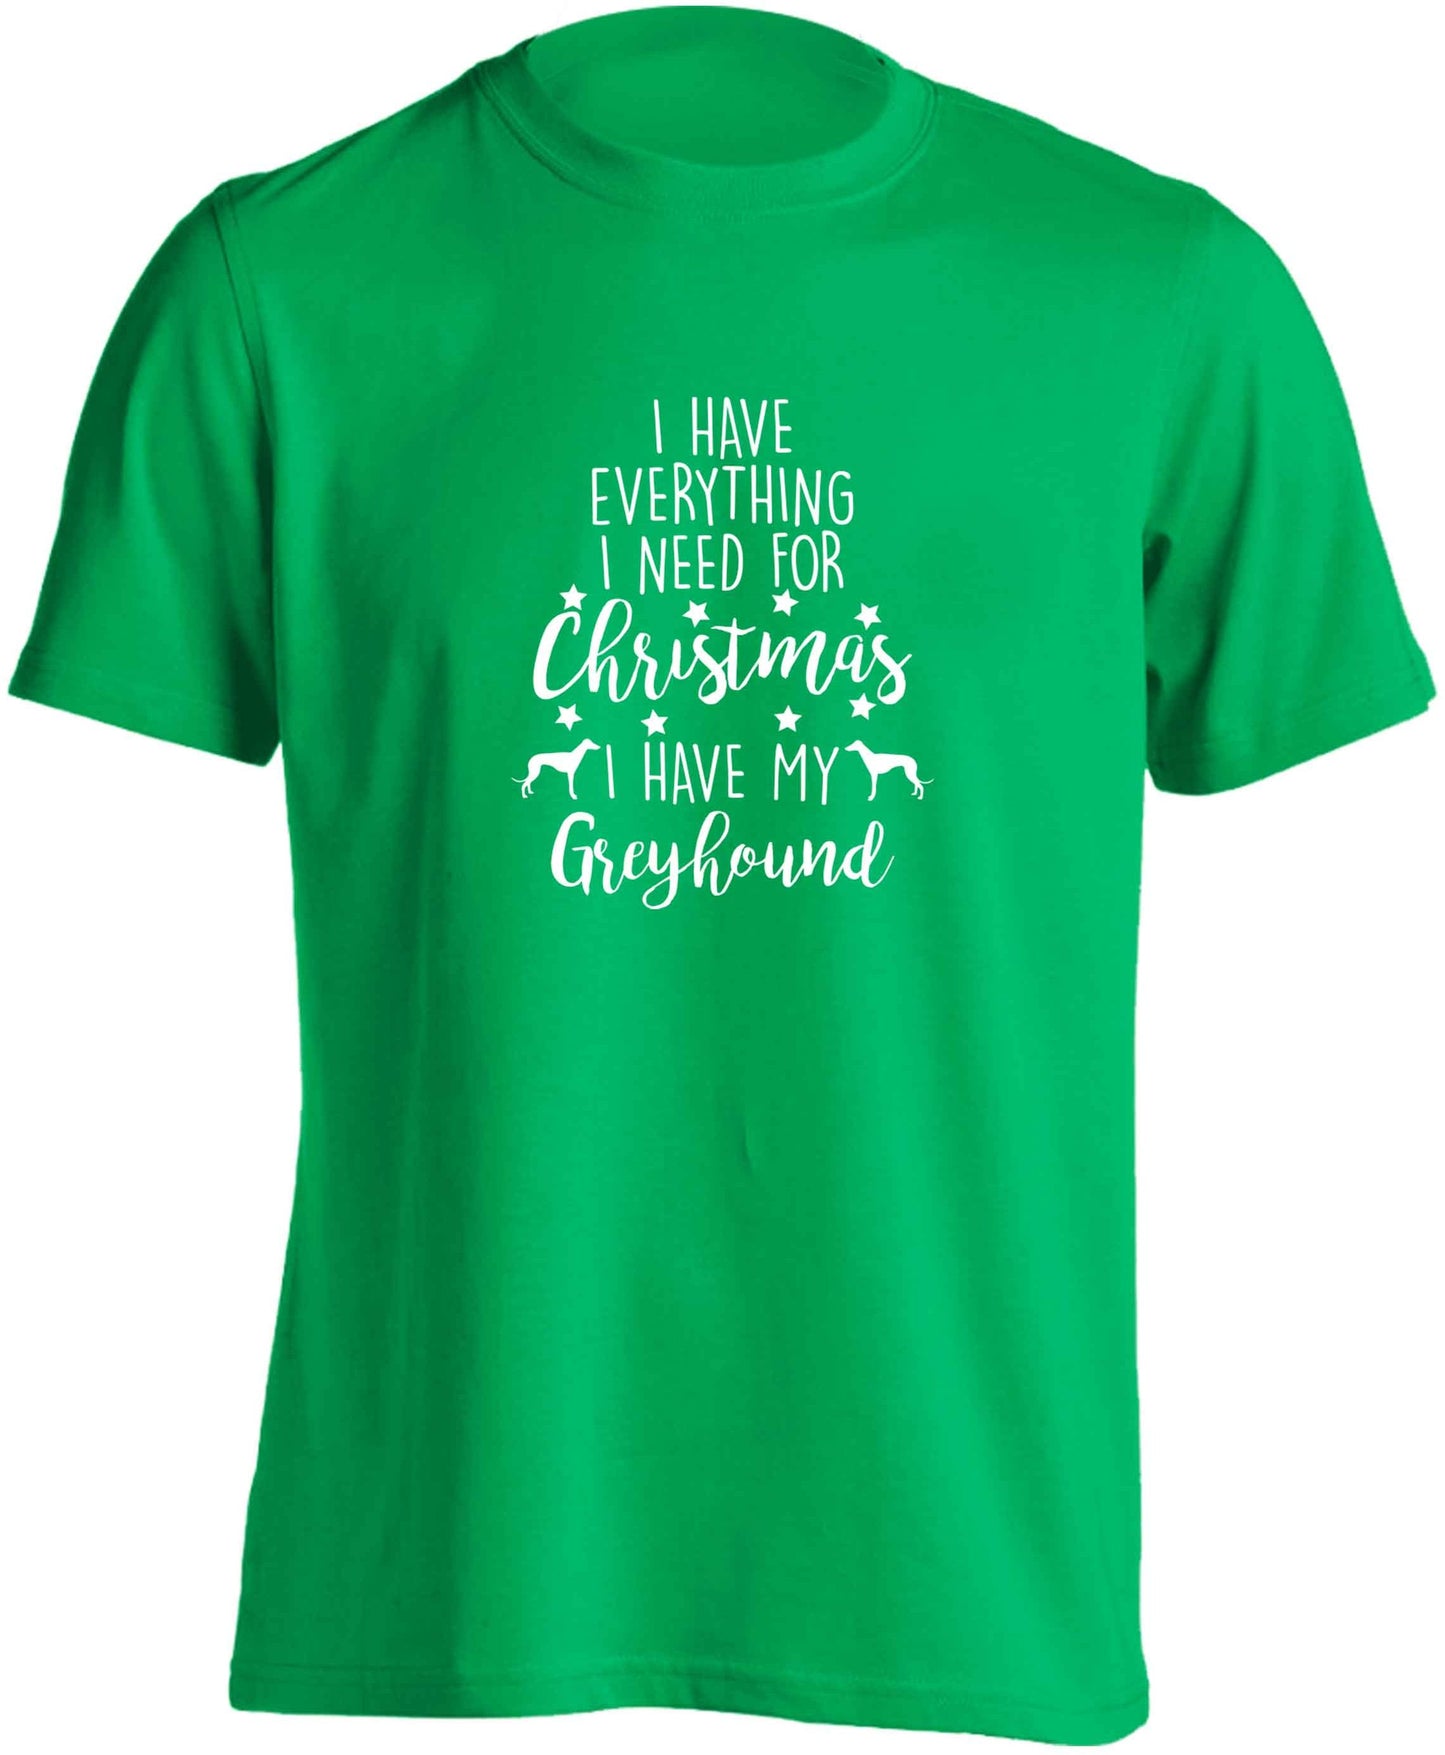 I have everything I need for Christmas I have my greyhound adults unisex green Tshirt 2XL